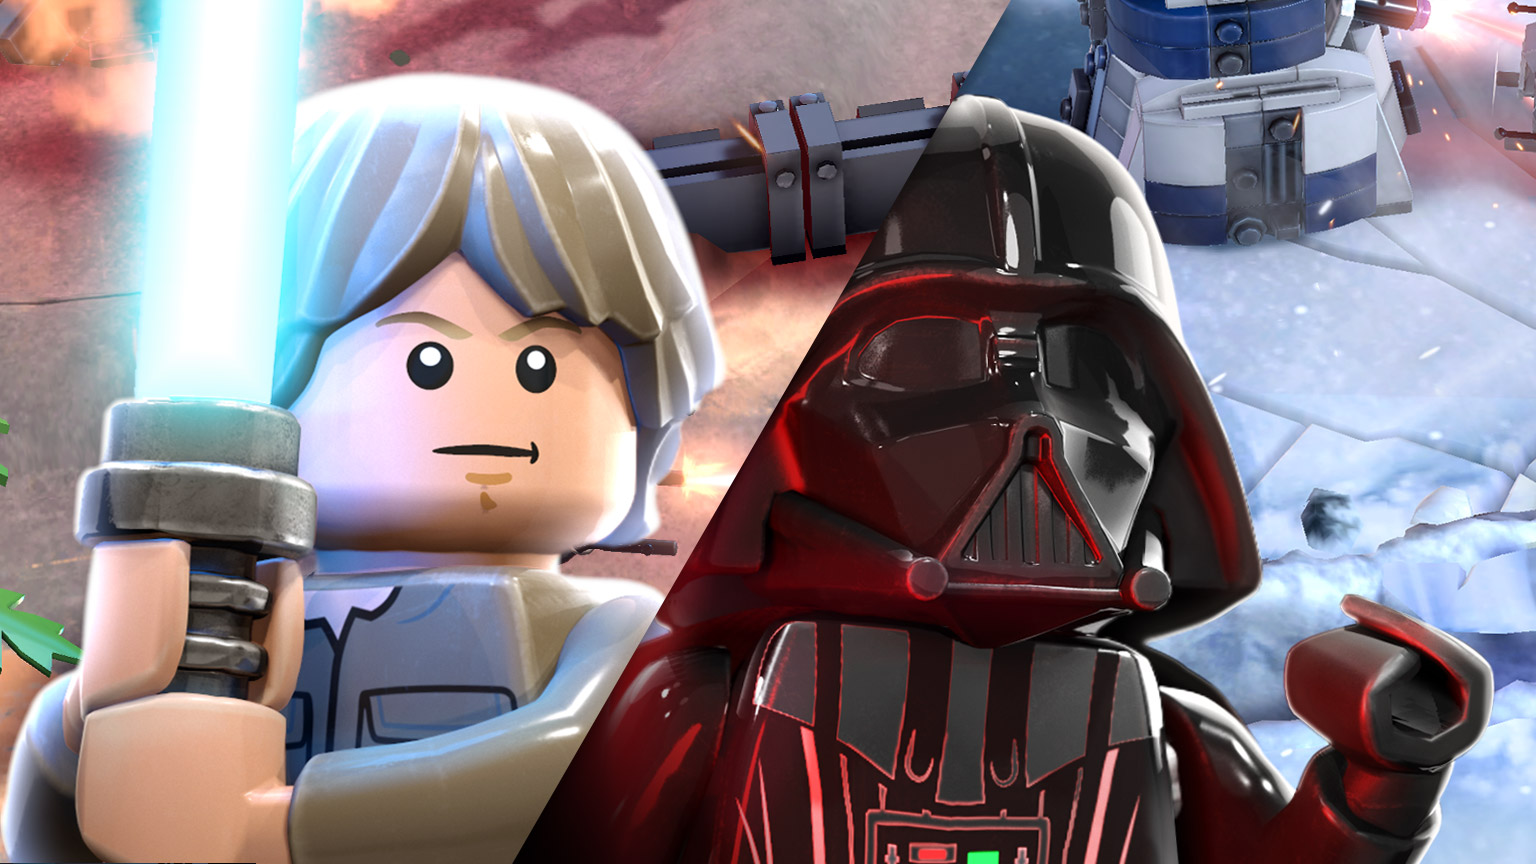 LEGO Star Wars Battles Announced For Mobile Devices